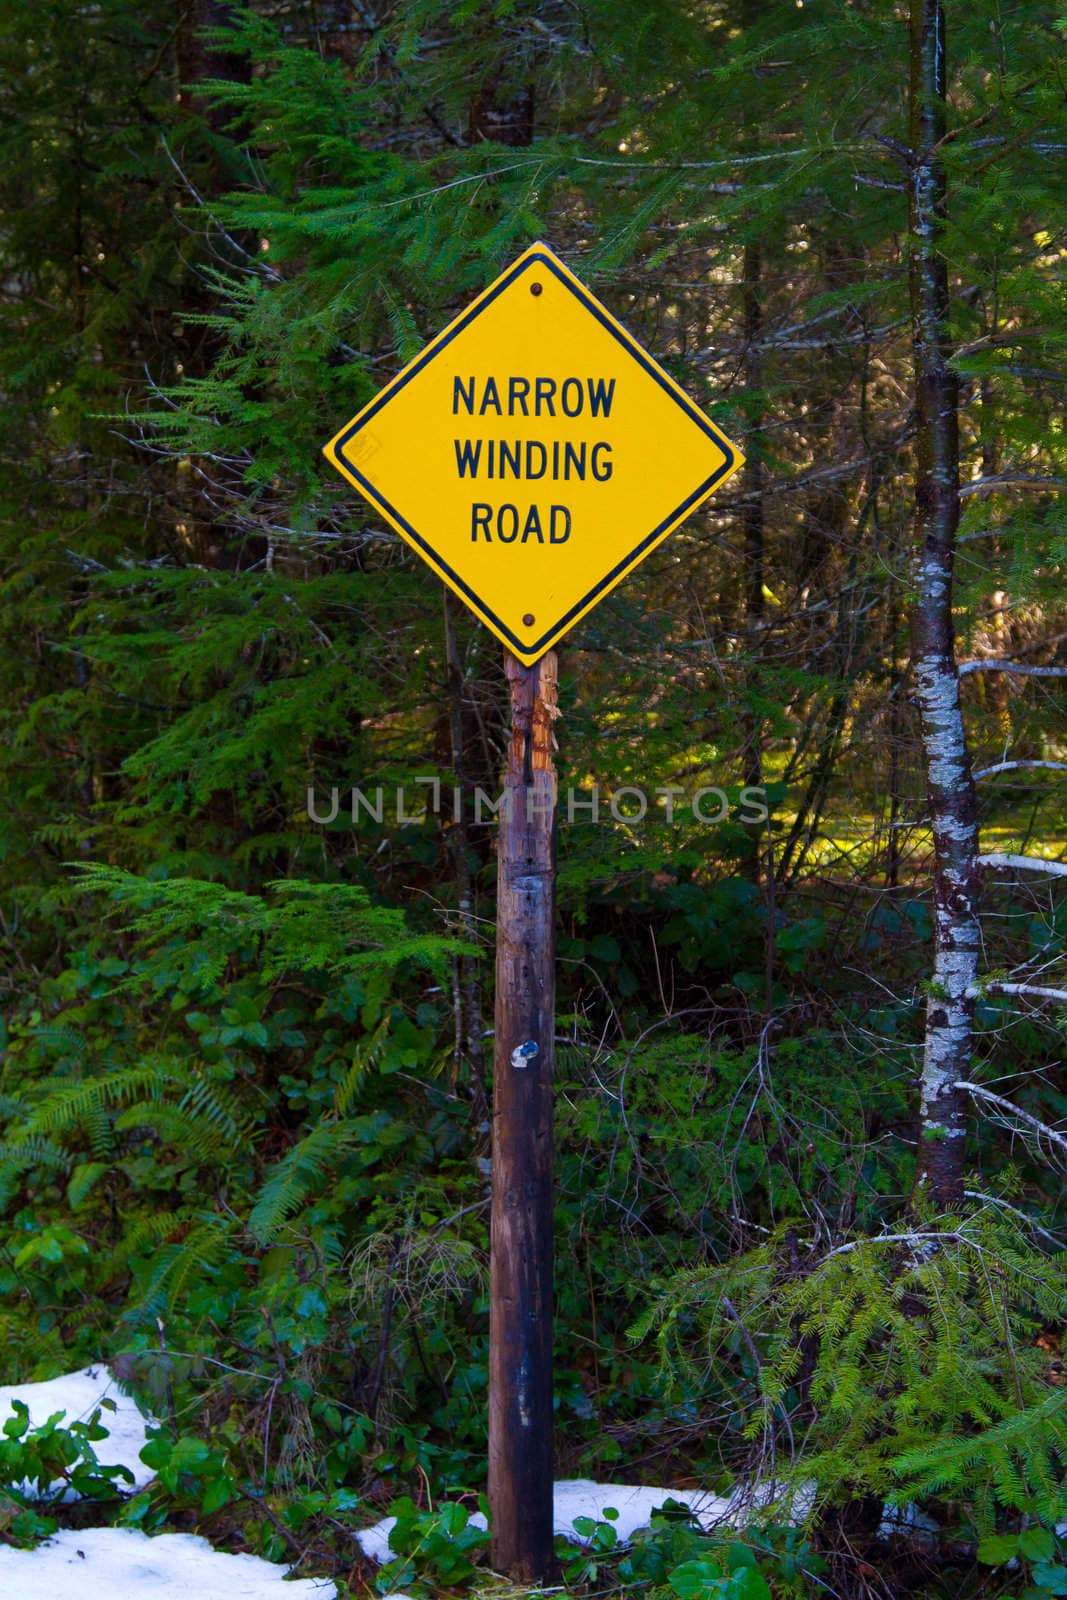 A yellow caution signs warns of a narrow and winding road ahead for drivers in this forest in the winter.